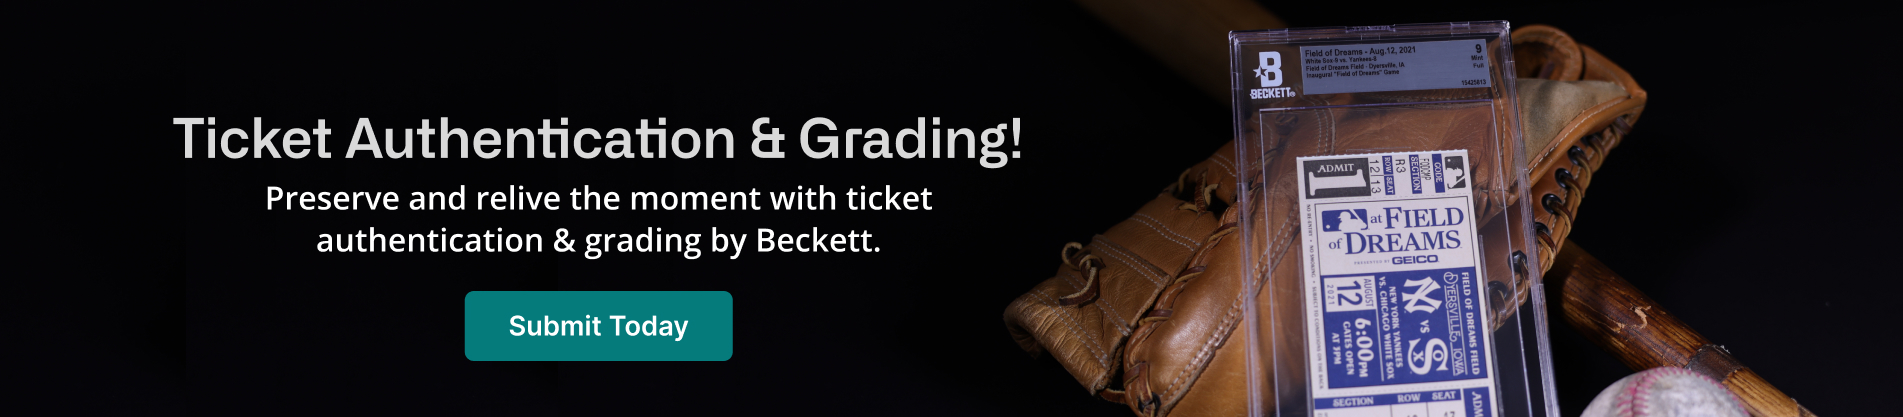 Ticket Authentication and Grading